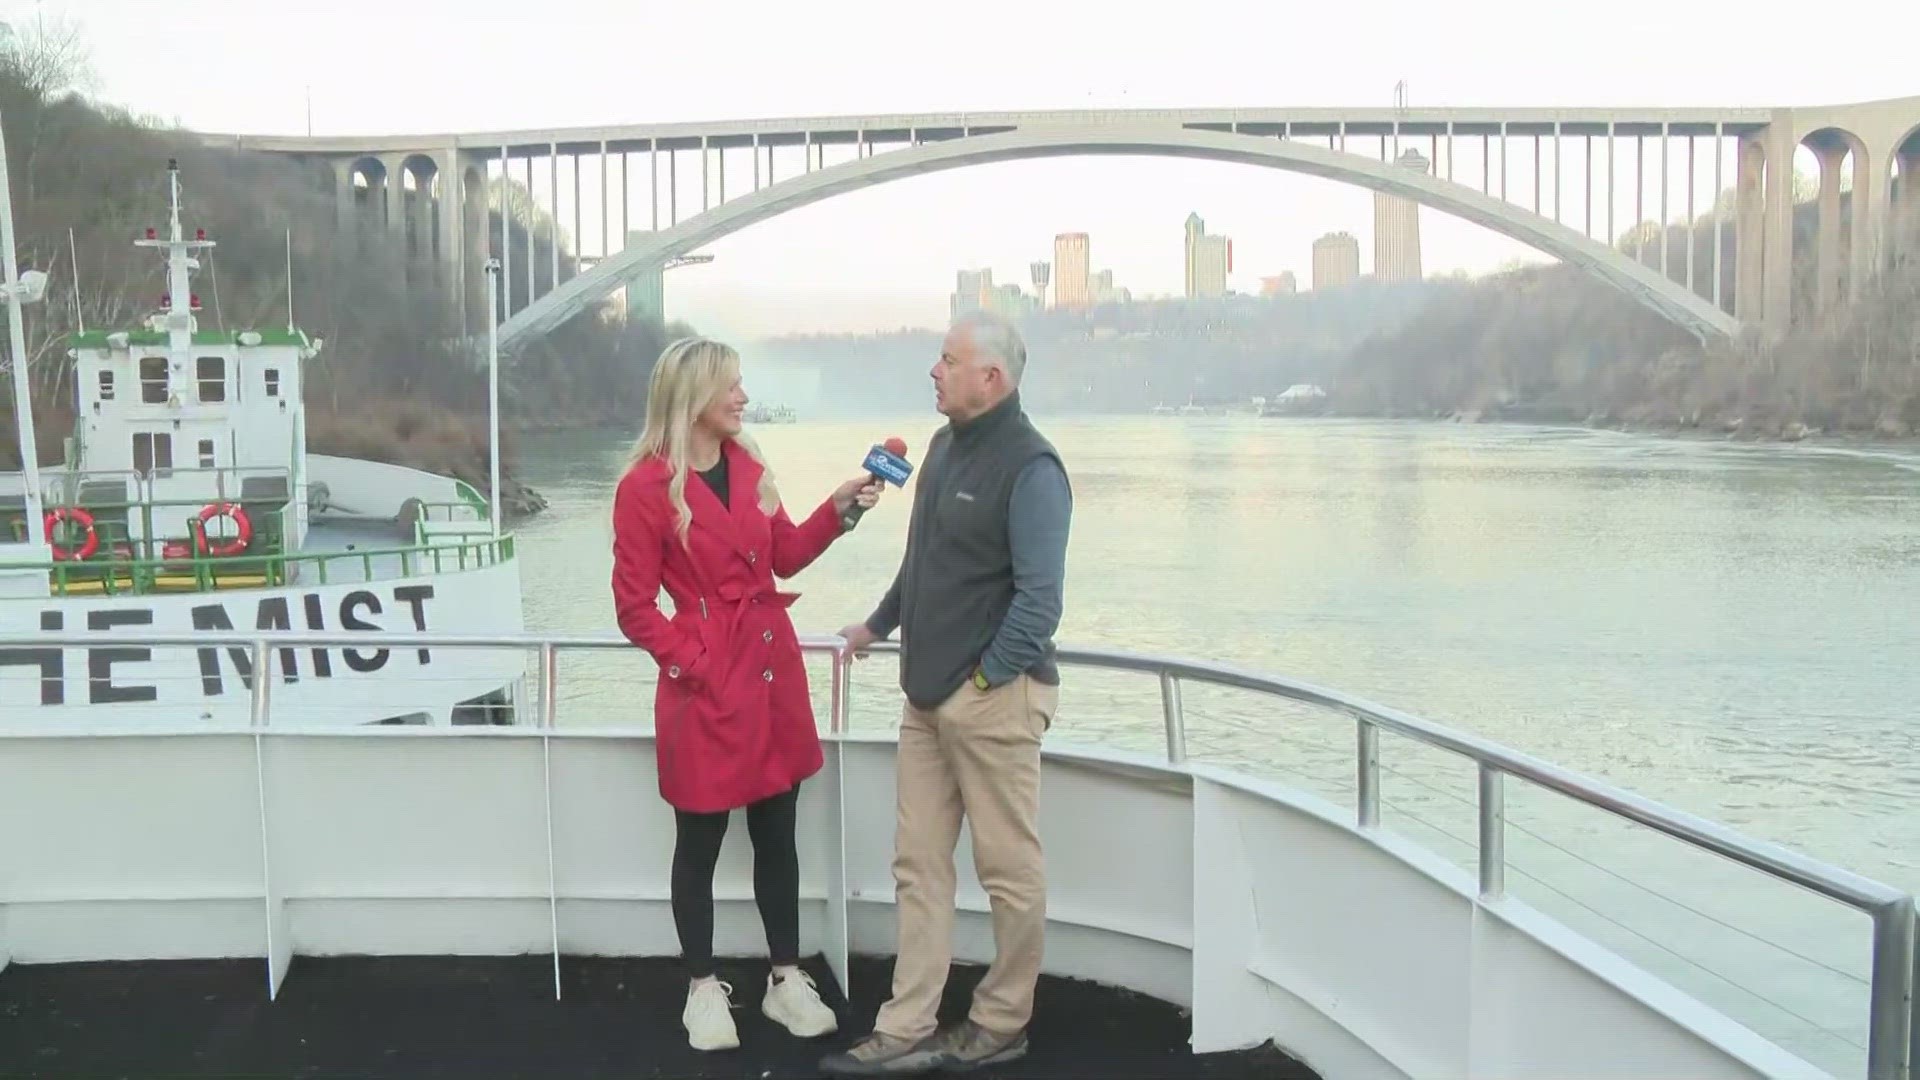 Daybreak's Lauren Hall was live from Niagara Falls to talk about the upcoming season.